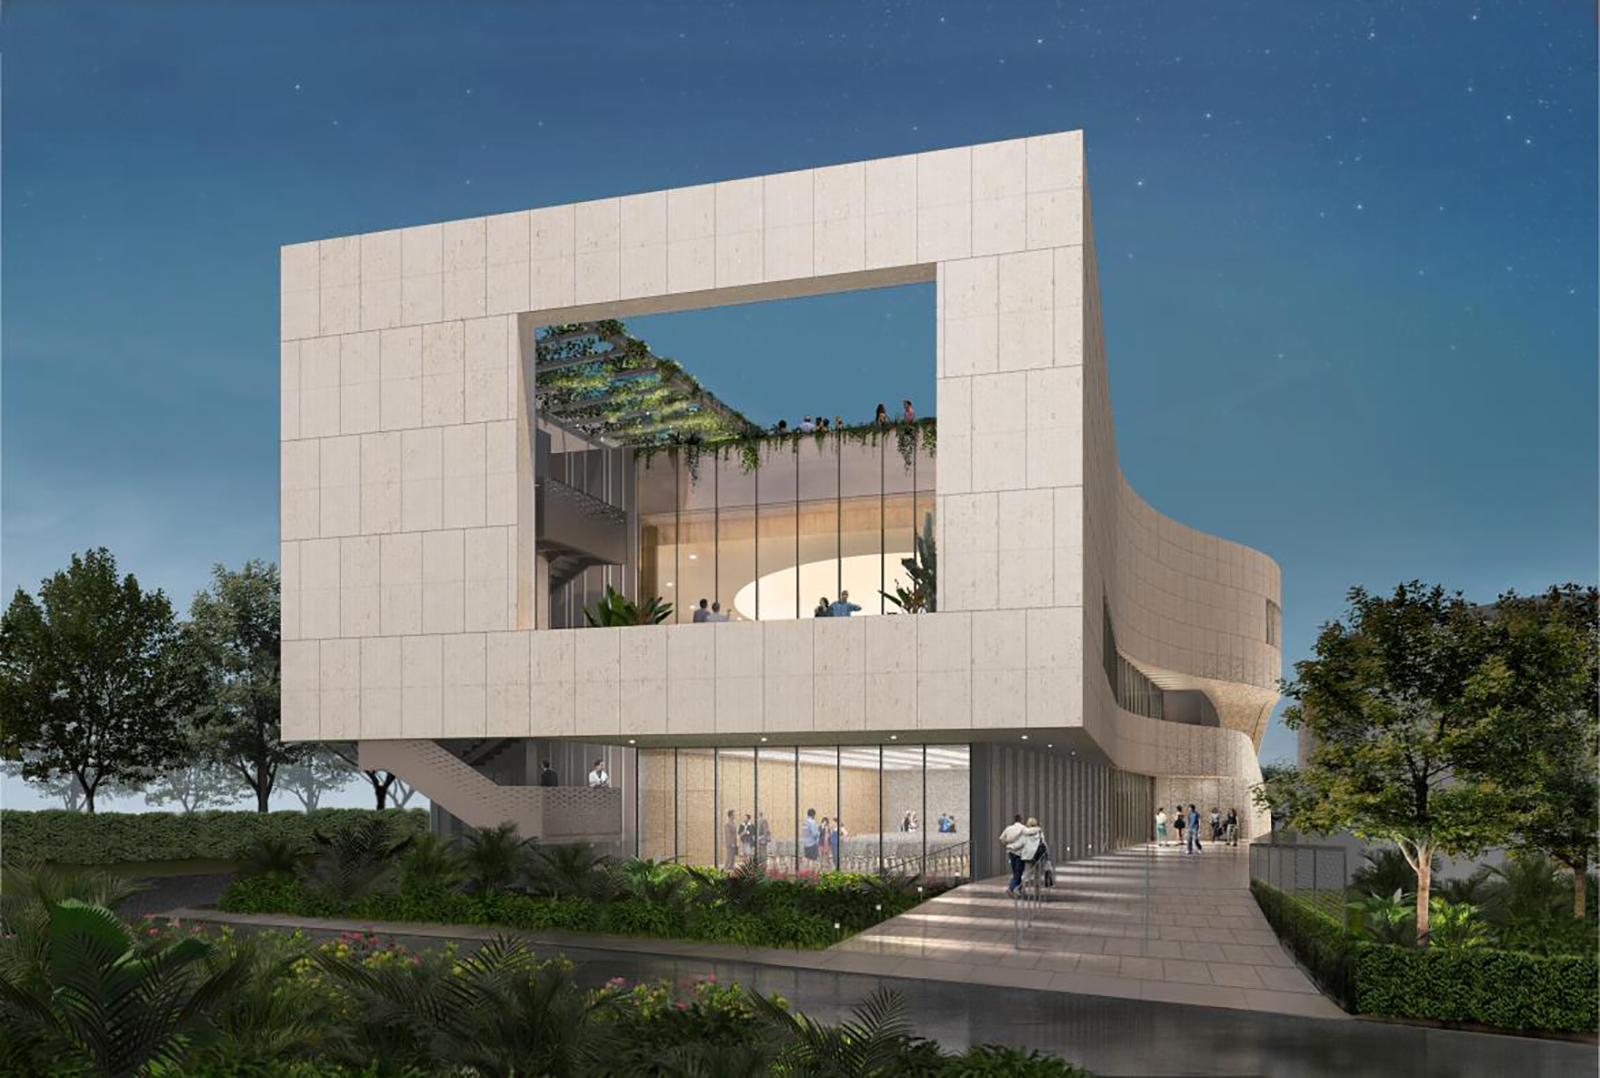 A rendering of the redesigned Baker Museum. Courtesy Weiss/Manfredi Architecture/Landscape/Urbanism